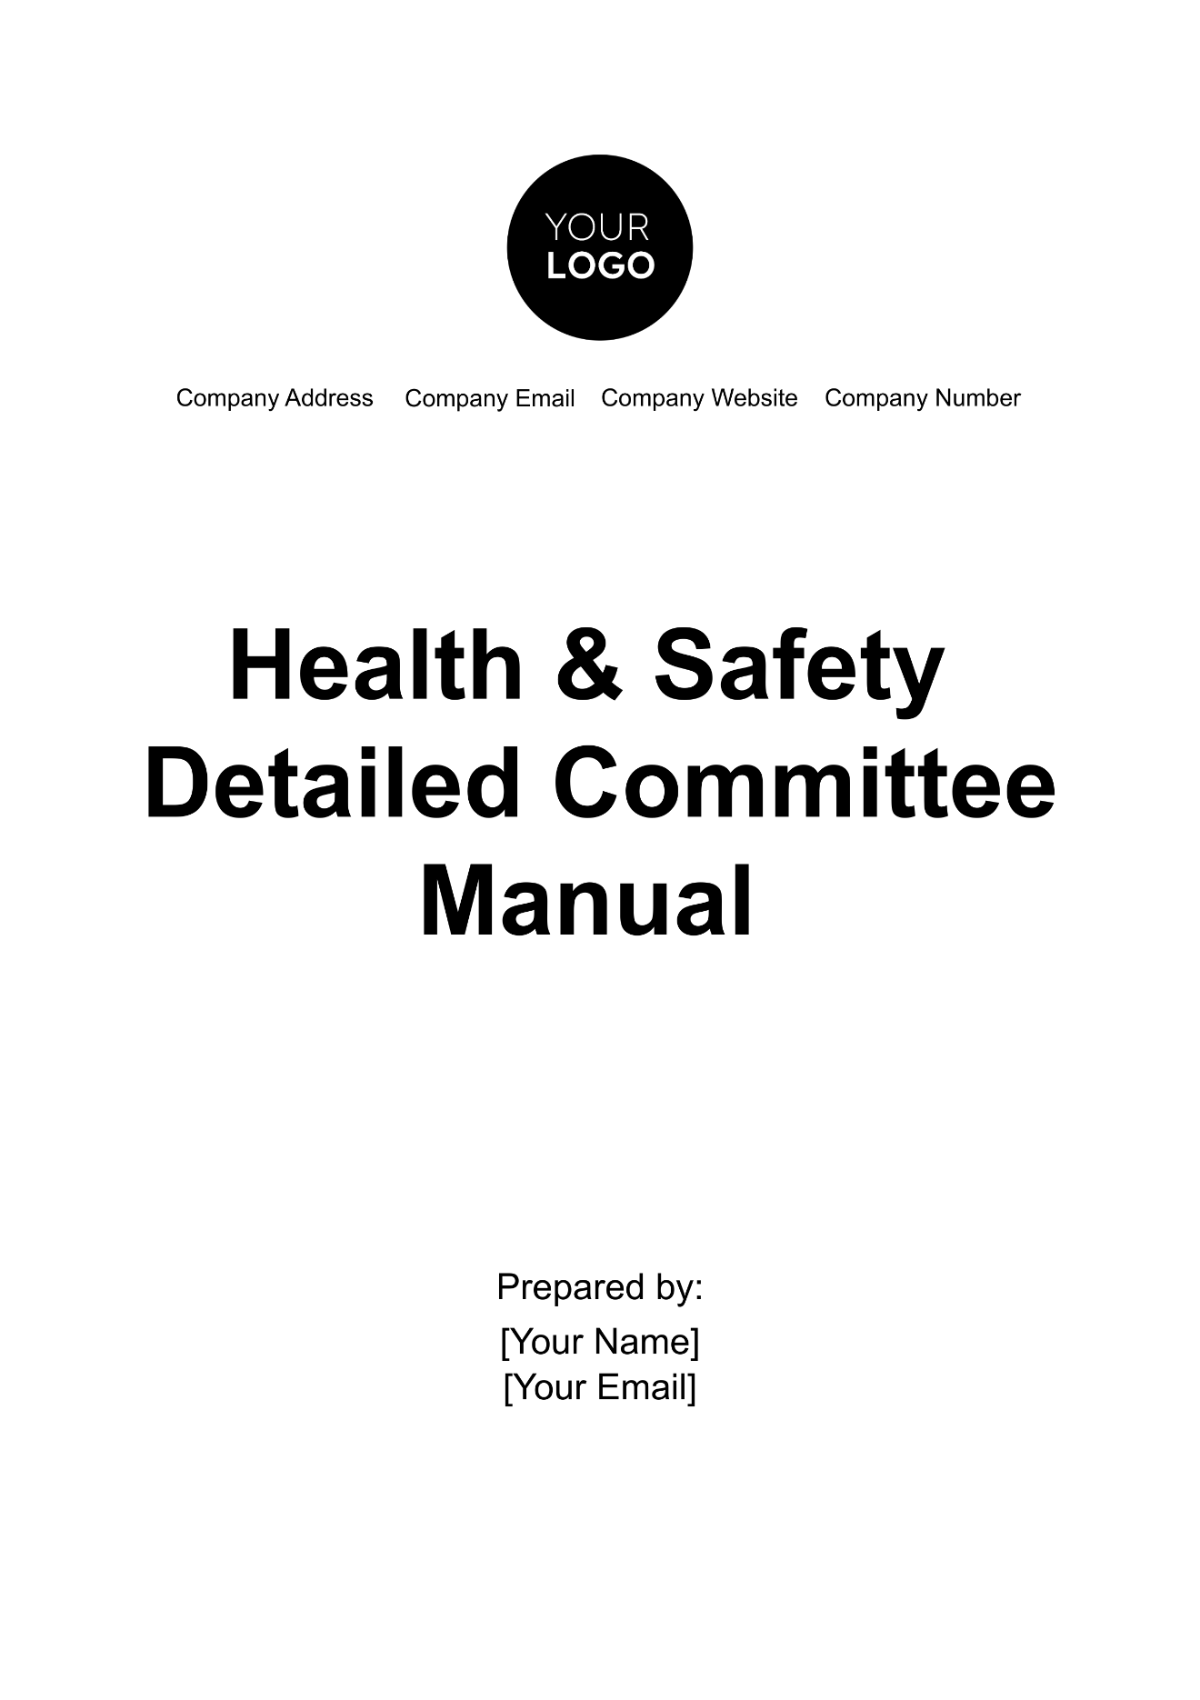 Free Health & Safety Detailed Committee Manual Template